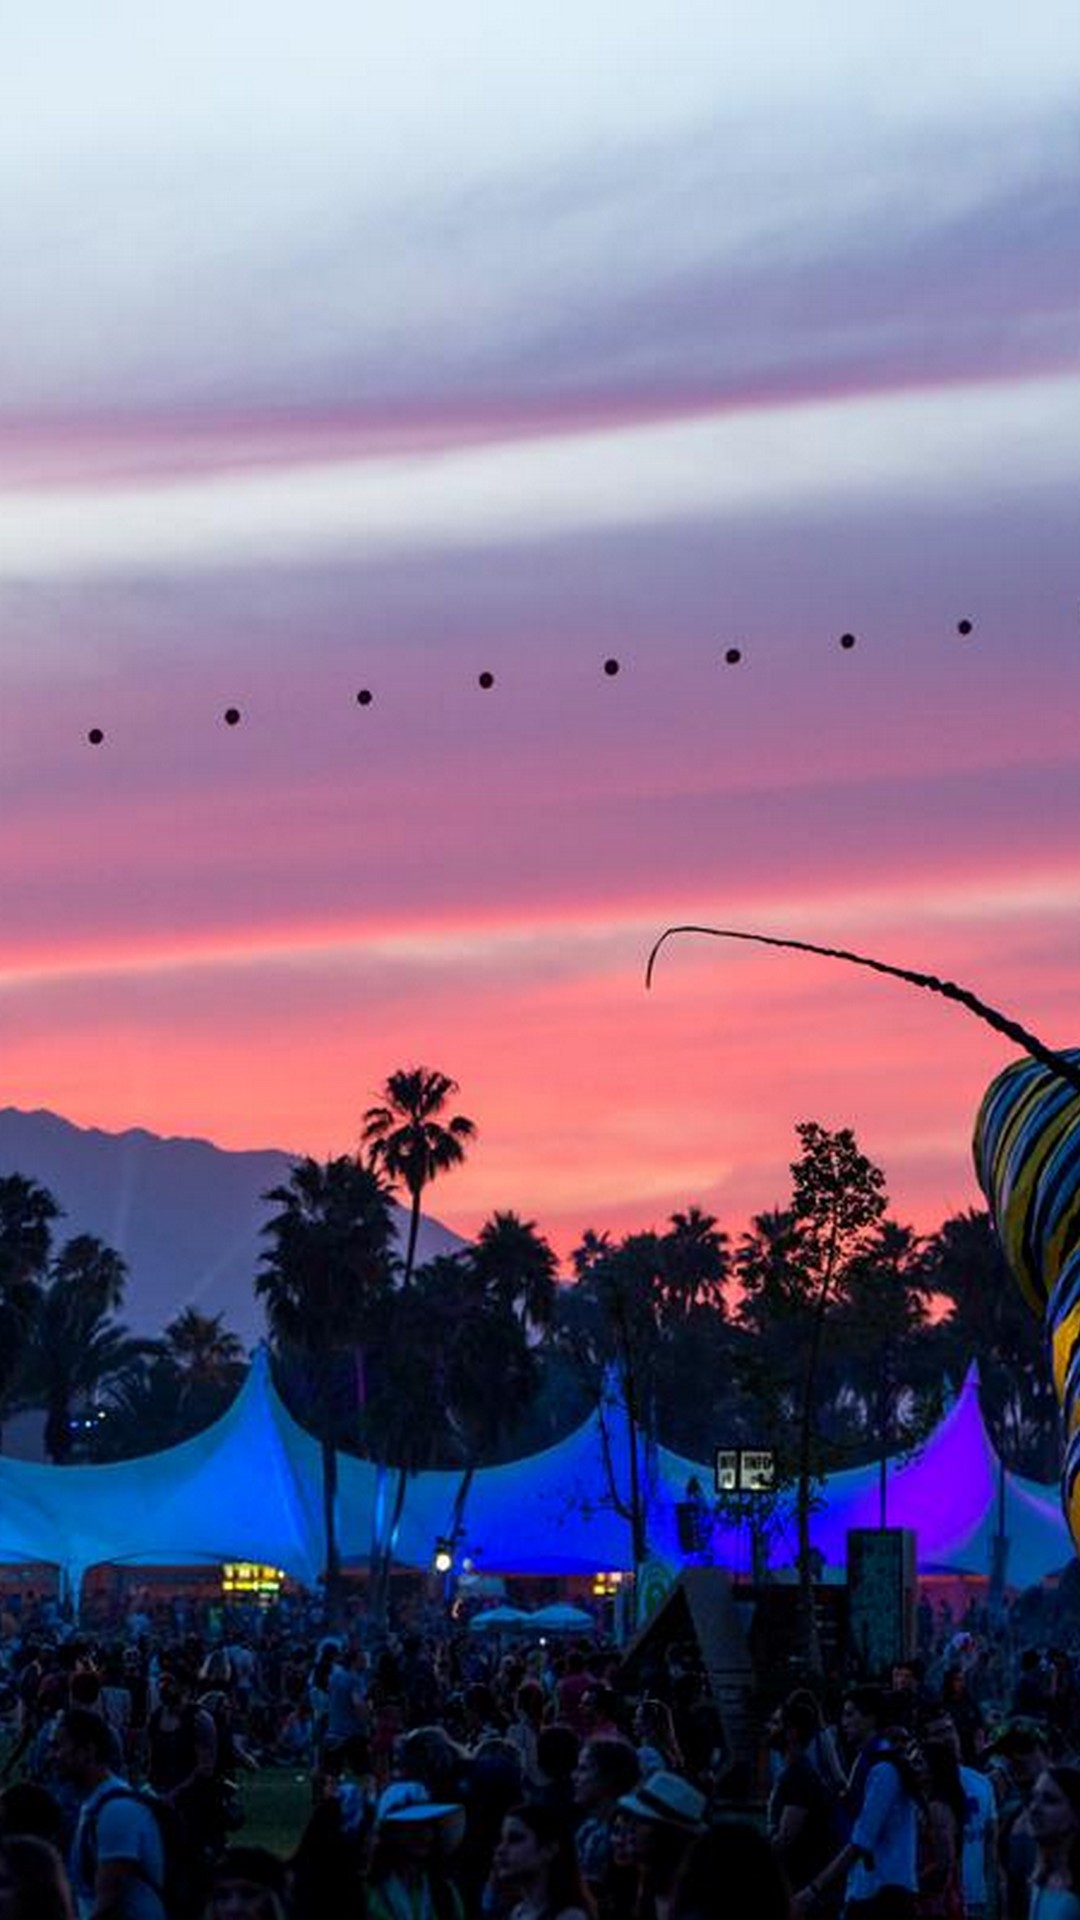 Coachella 2019 iPhone 6 Wallpaper HD with high-resolution 1080x1920 pixel. Download all Mobile Wallpapers and Use them as wallpapers for your iPhone, Tablet, iPad, Android and other mobile devices